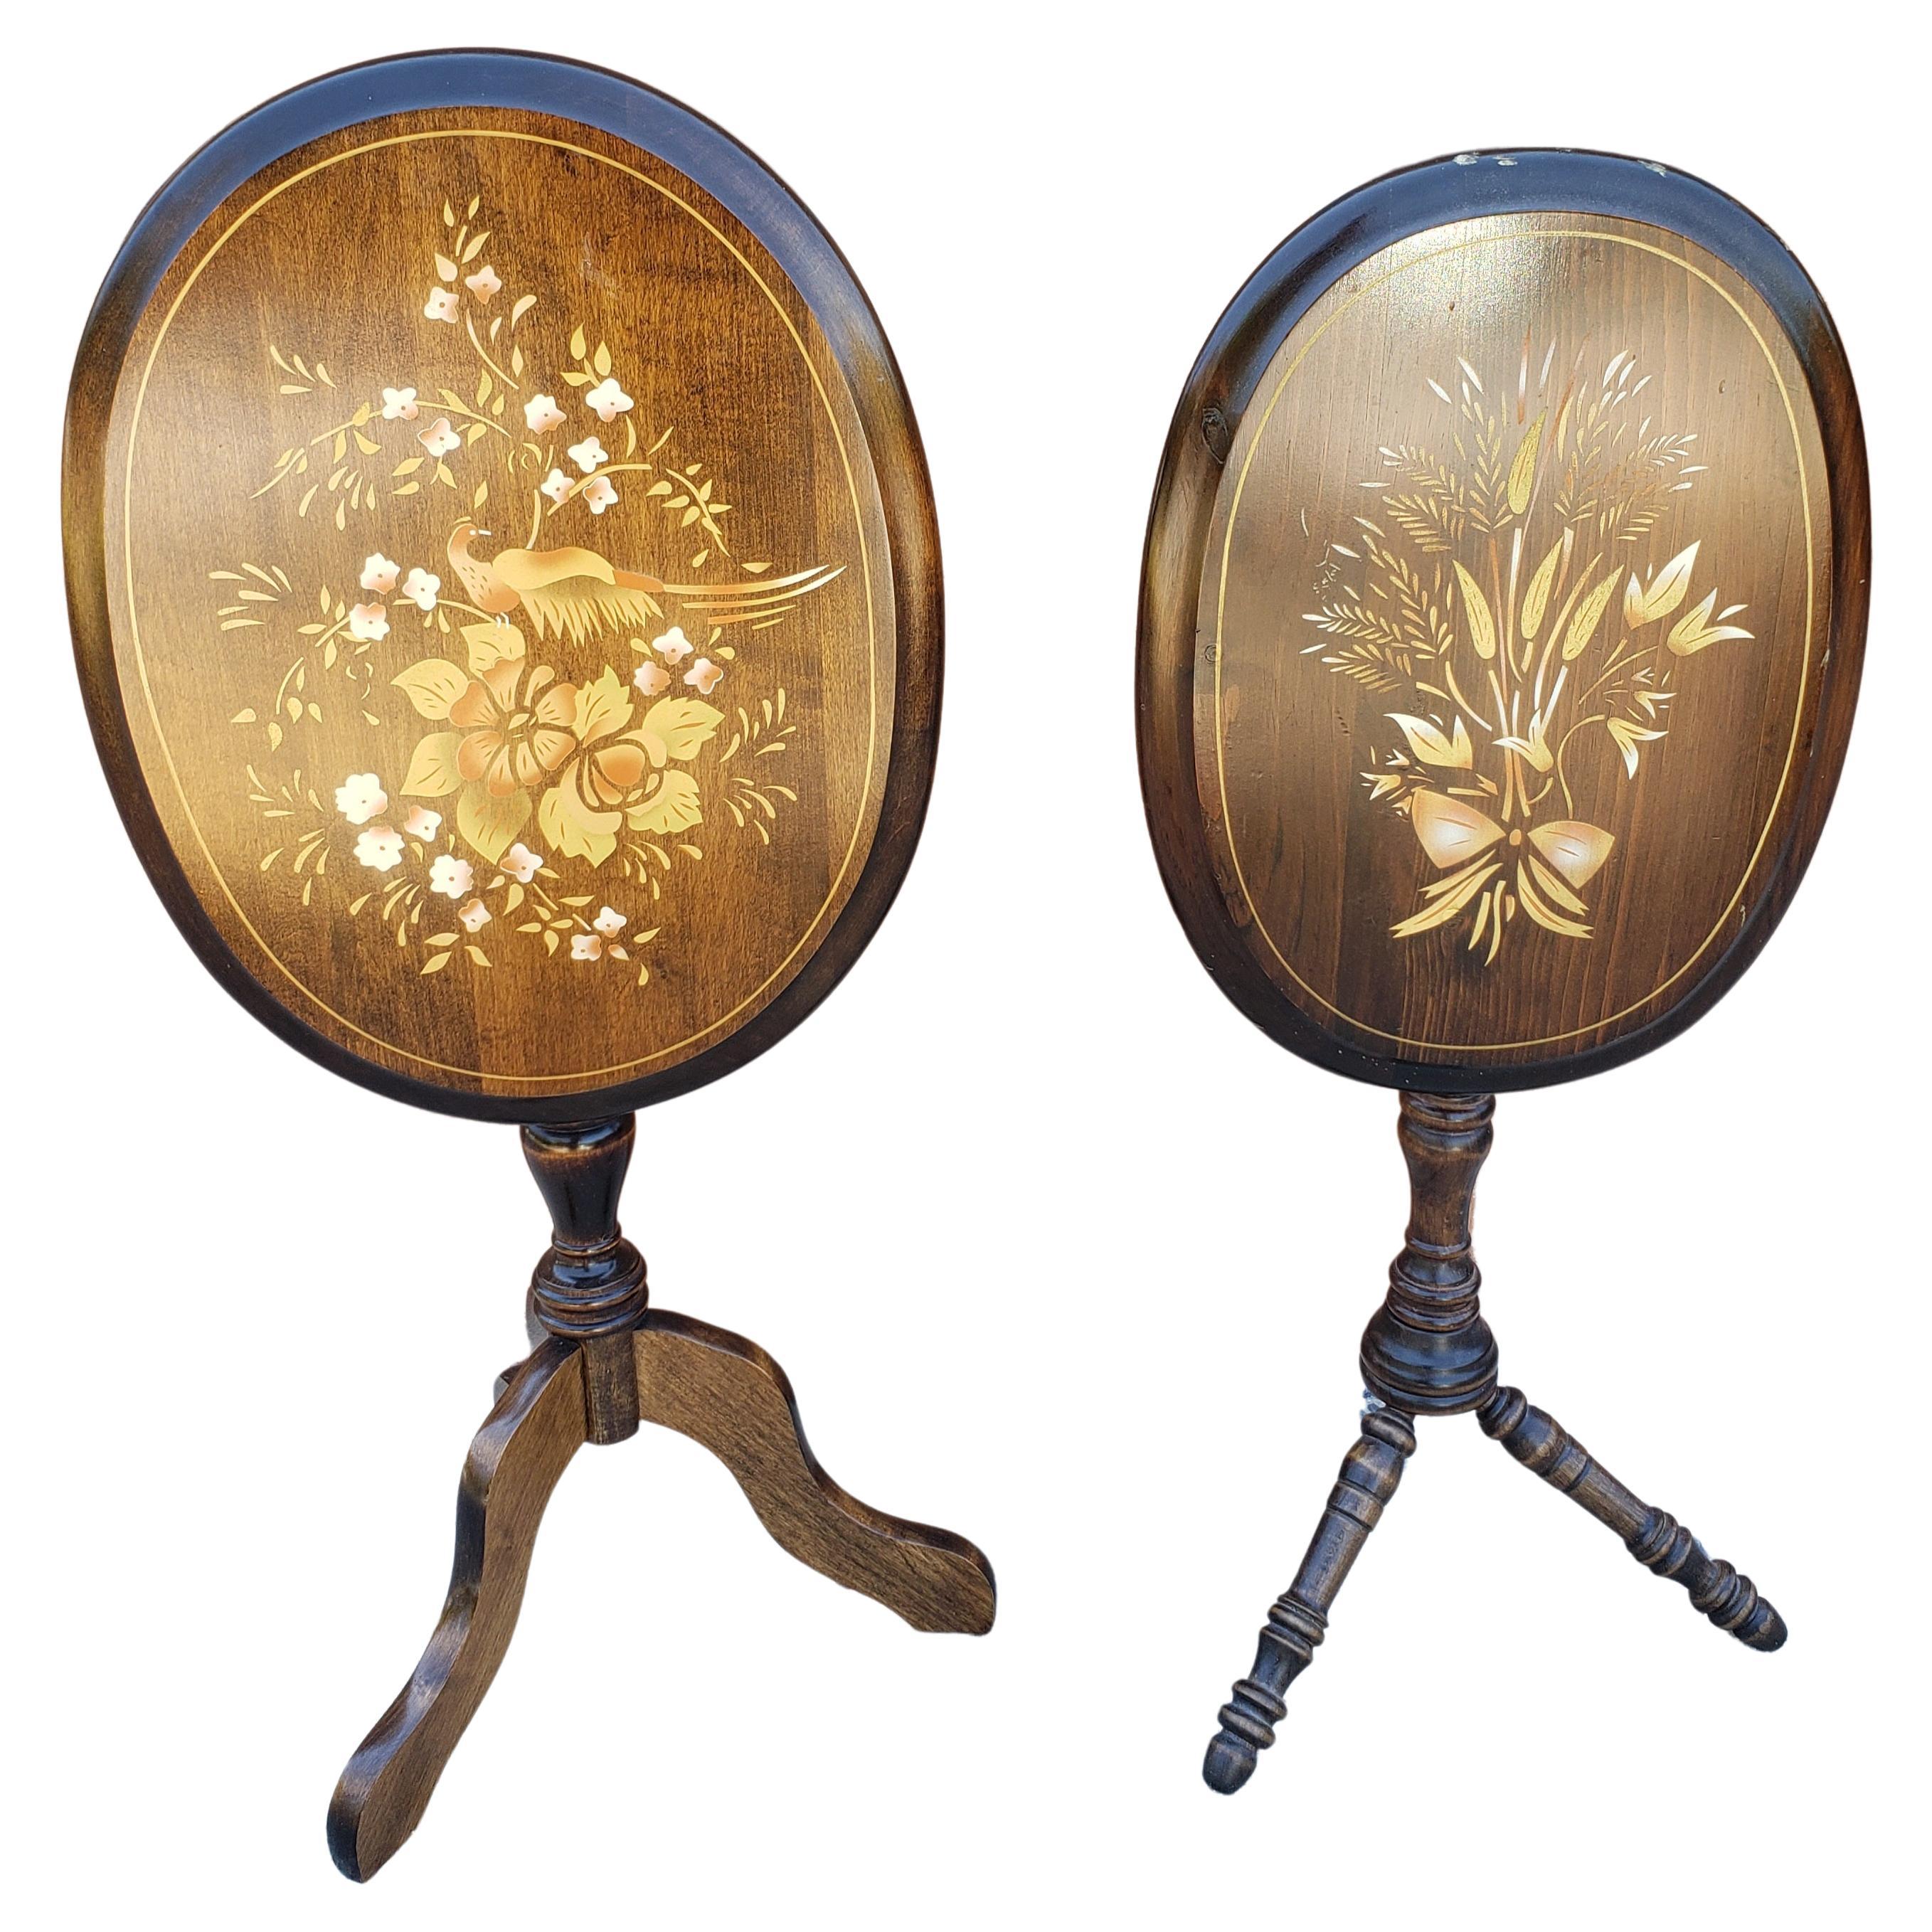 Pair of Stencil Decorated Tilt-Top Candle Stands For Sale